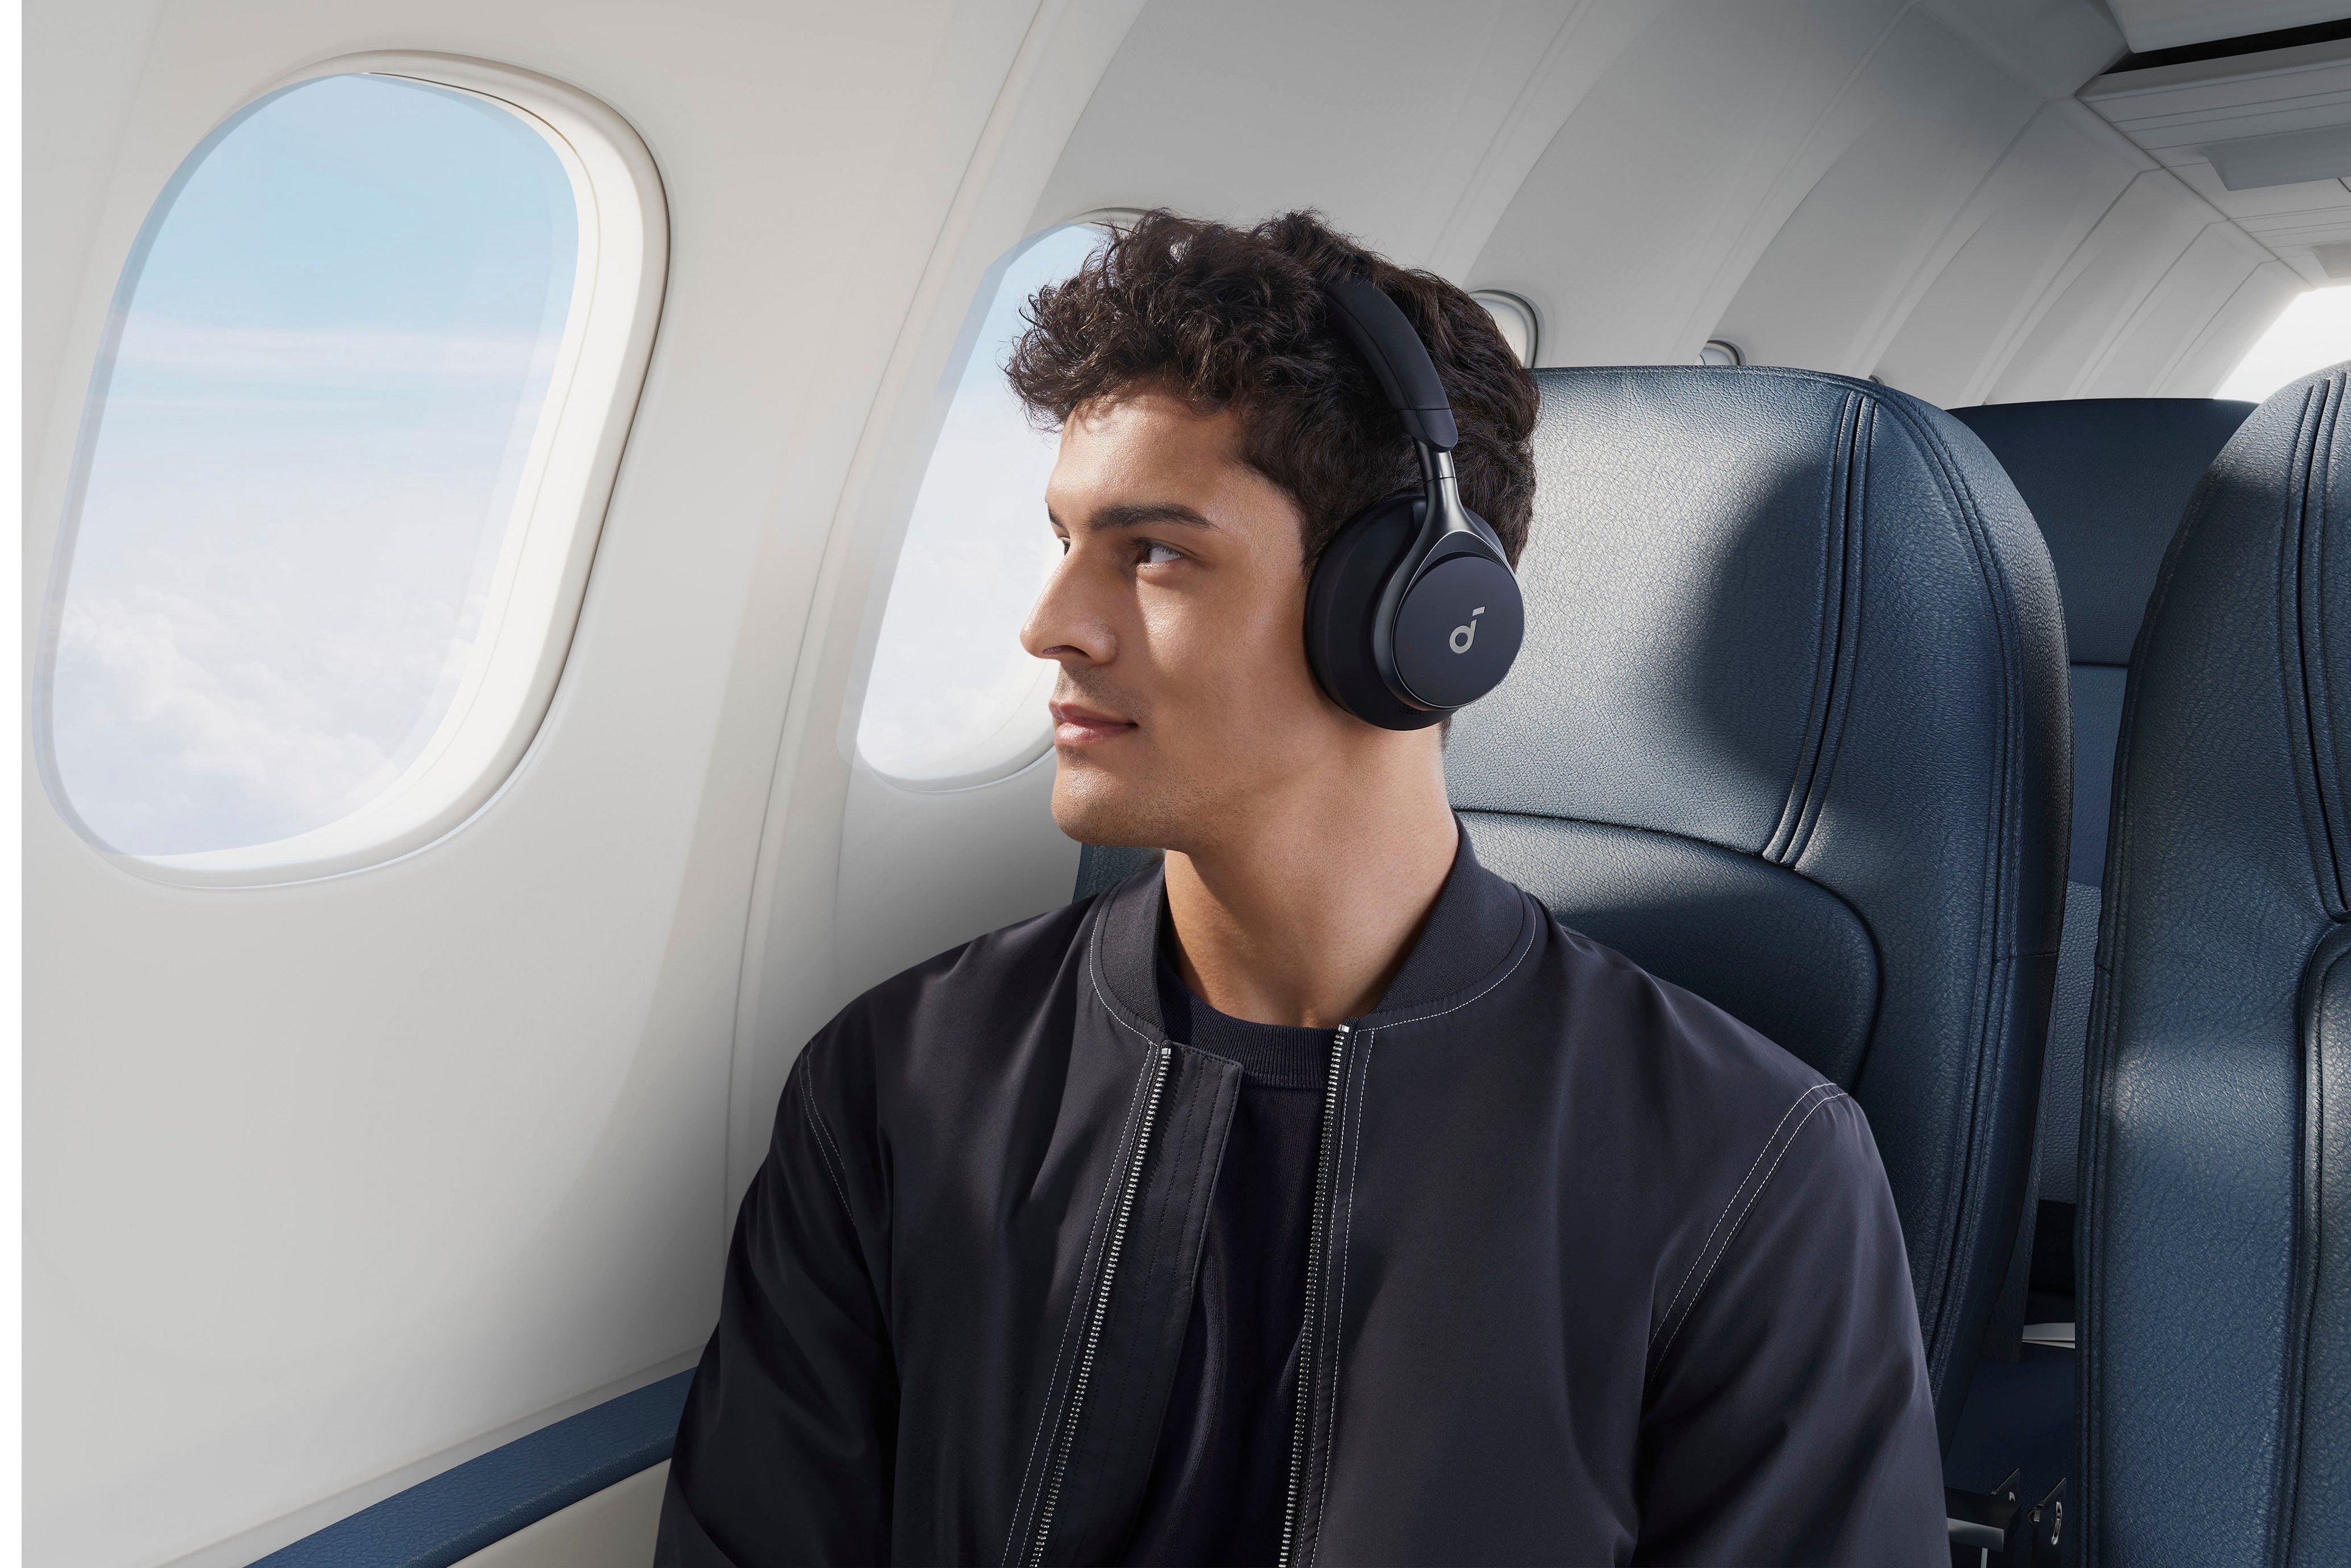 soundcore Space One, Upgraded Noise Cancelling Headphones